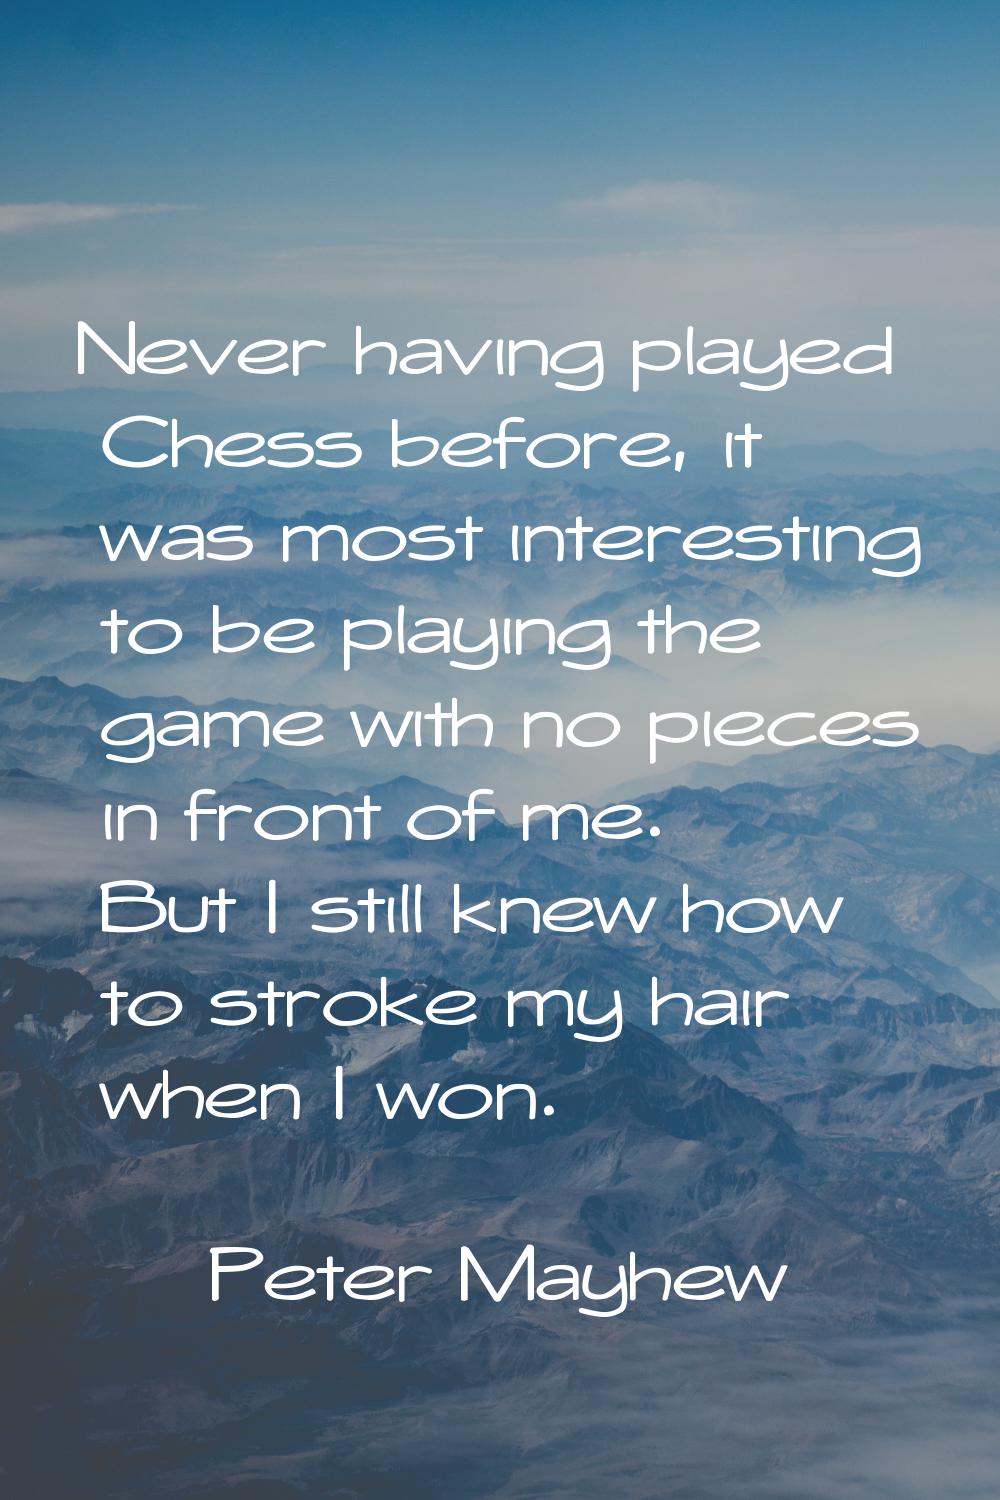 Never having played Chess before, it was most interesting to be playing the game with no pieces in 